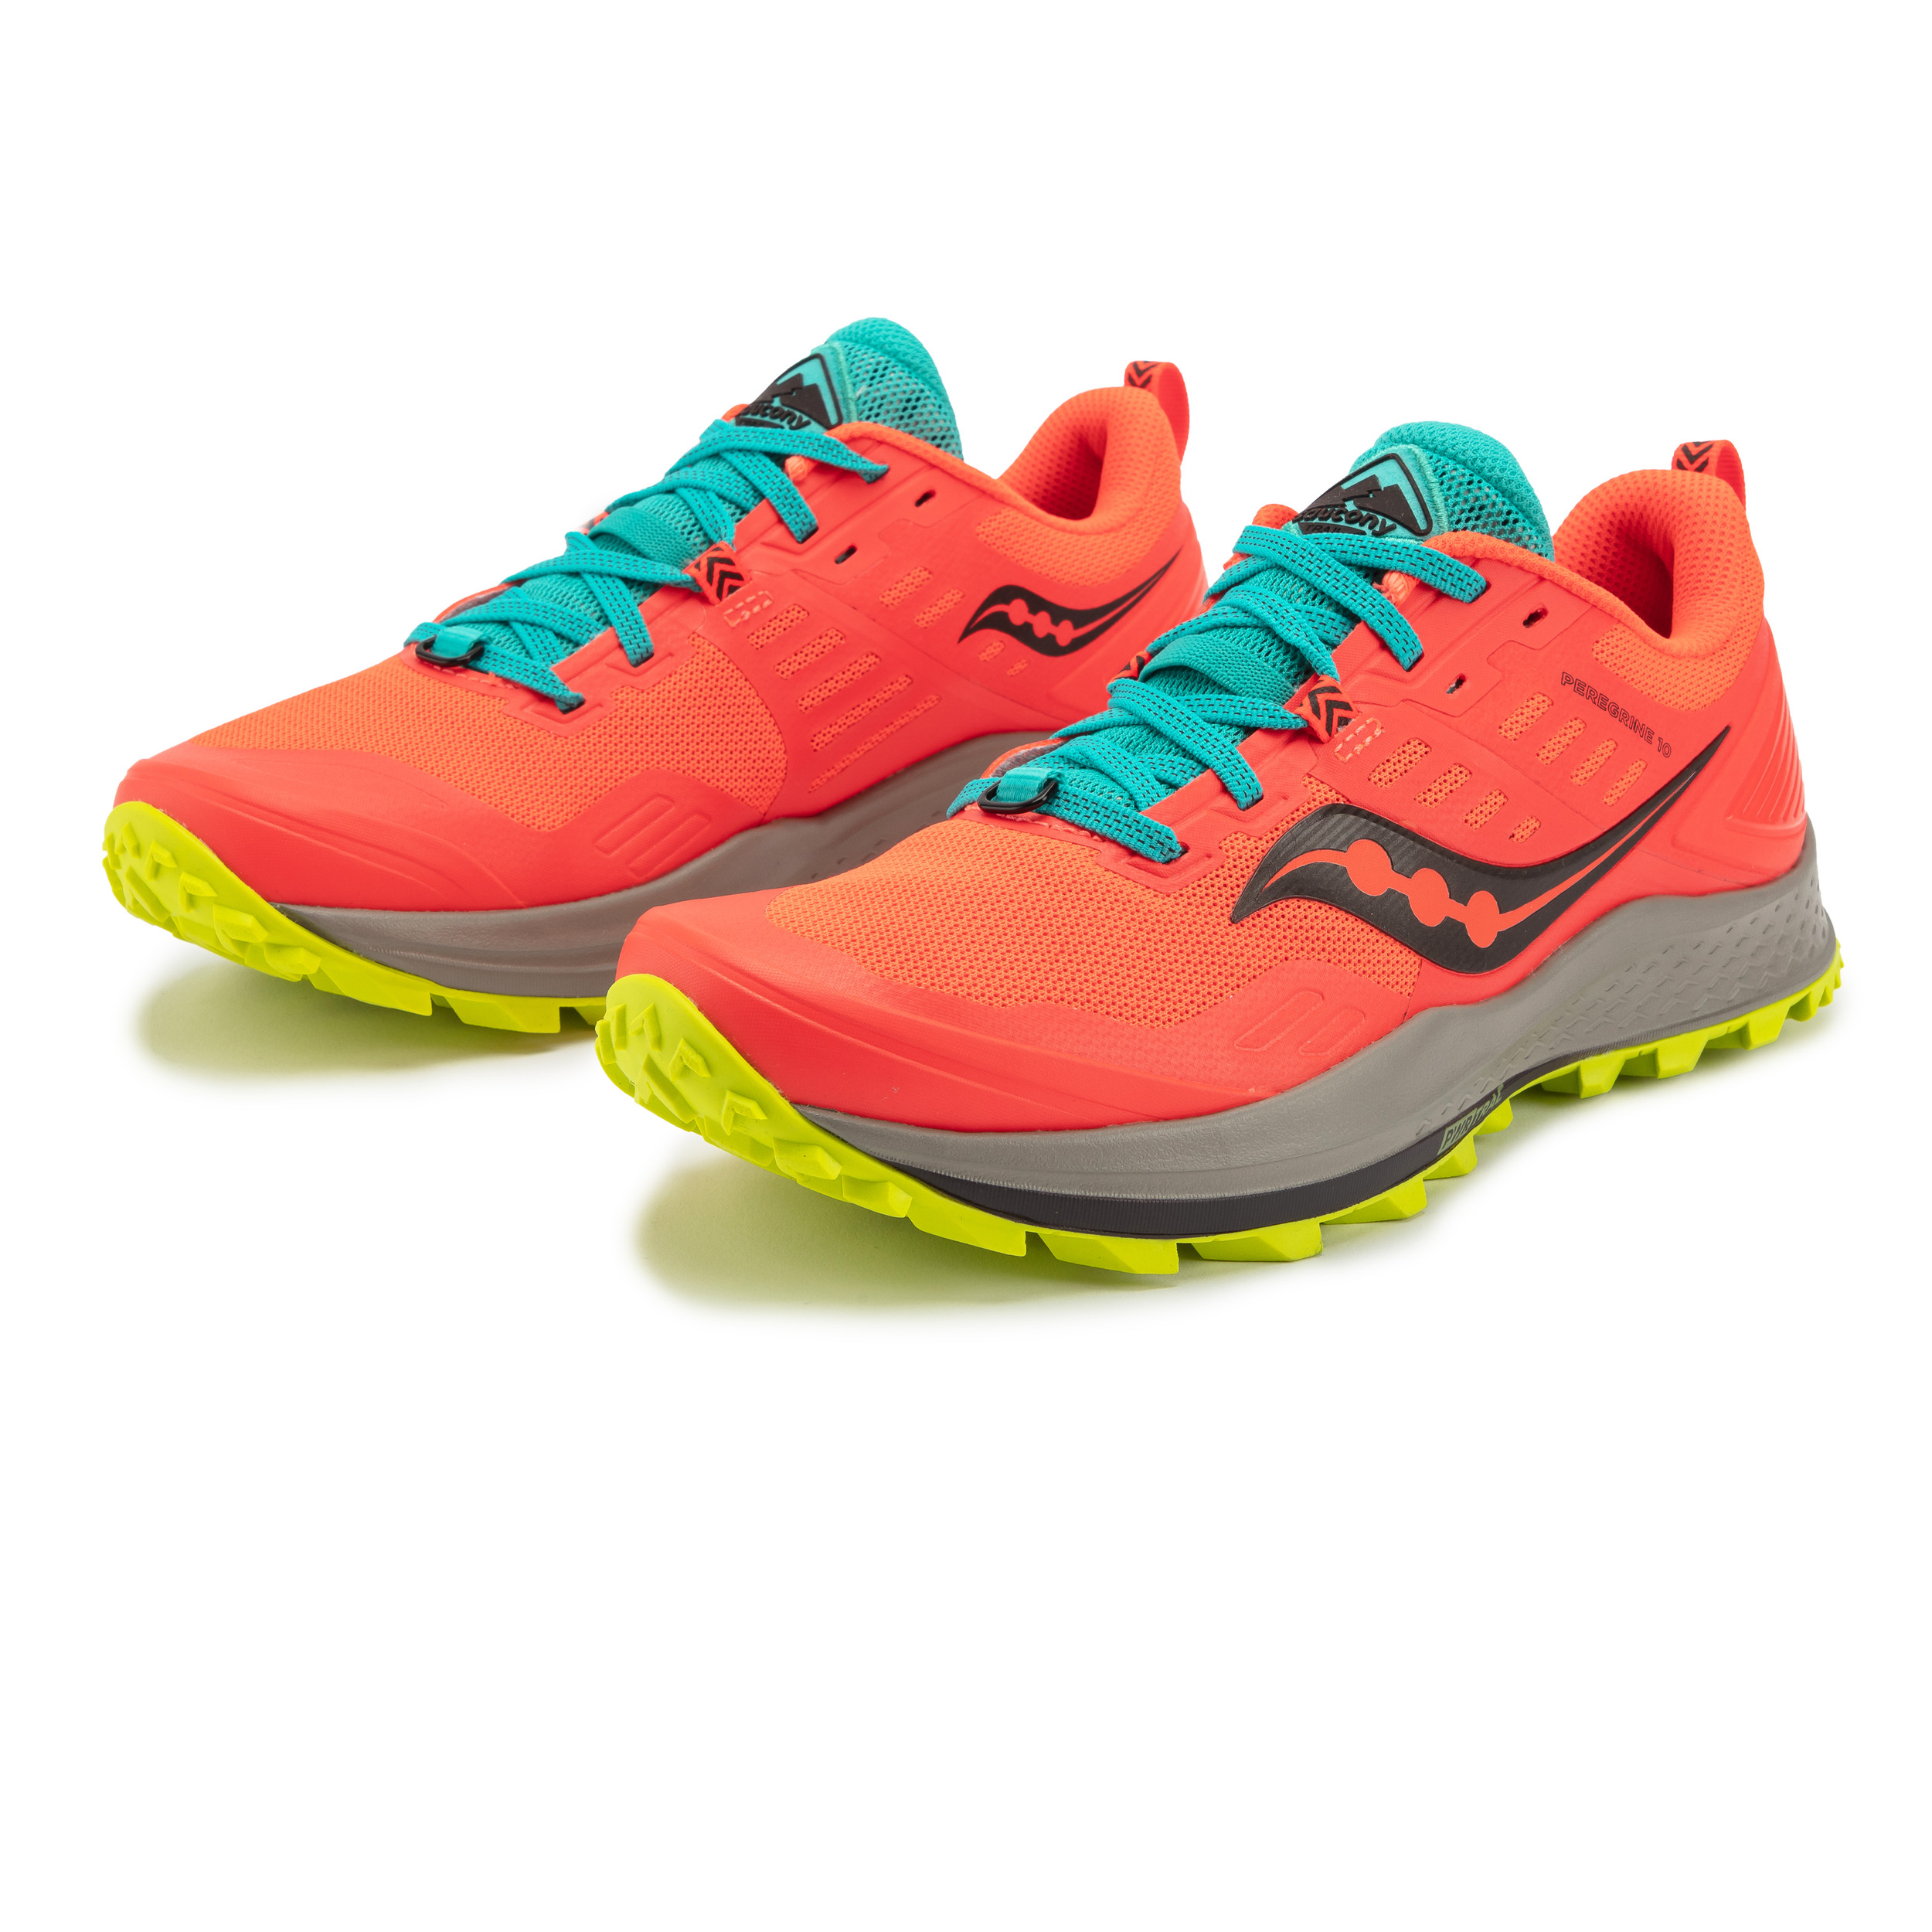 Saucony Peregrine 10 Women's Trail Running Shoes - AW20